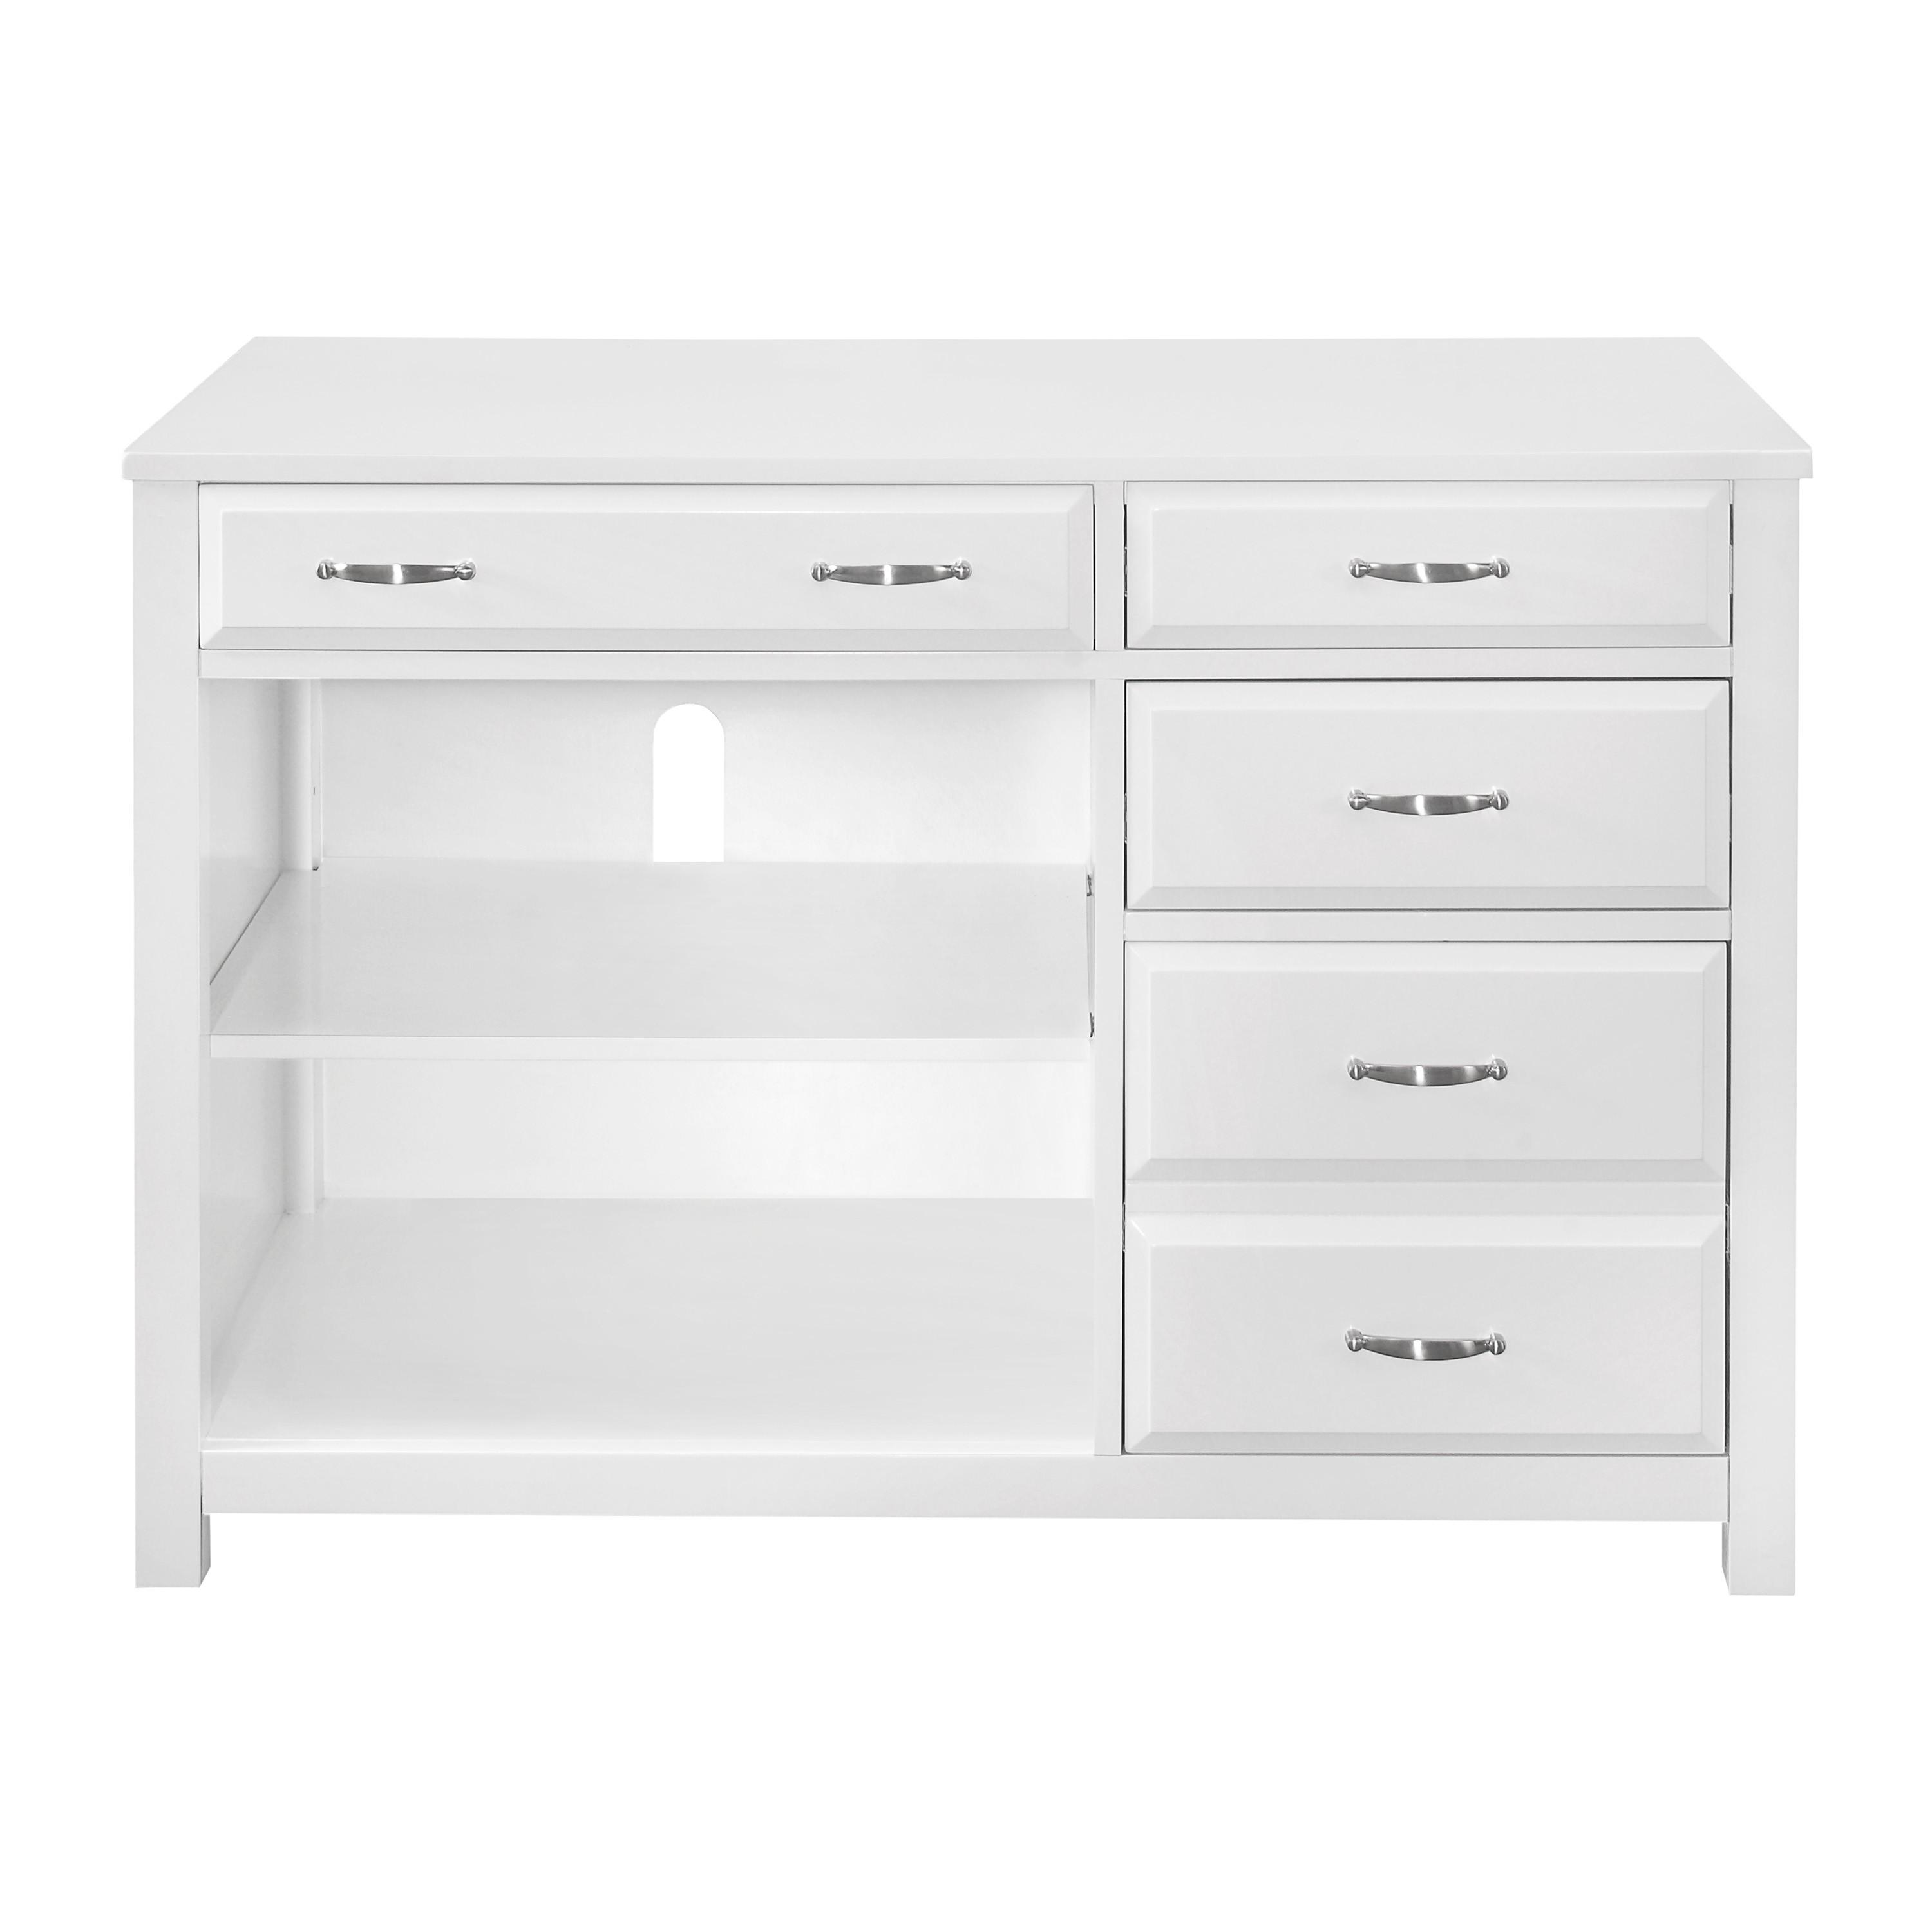 

    
Transitional White Wood Credenza Homelegance 4522WH-16 Blanche
